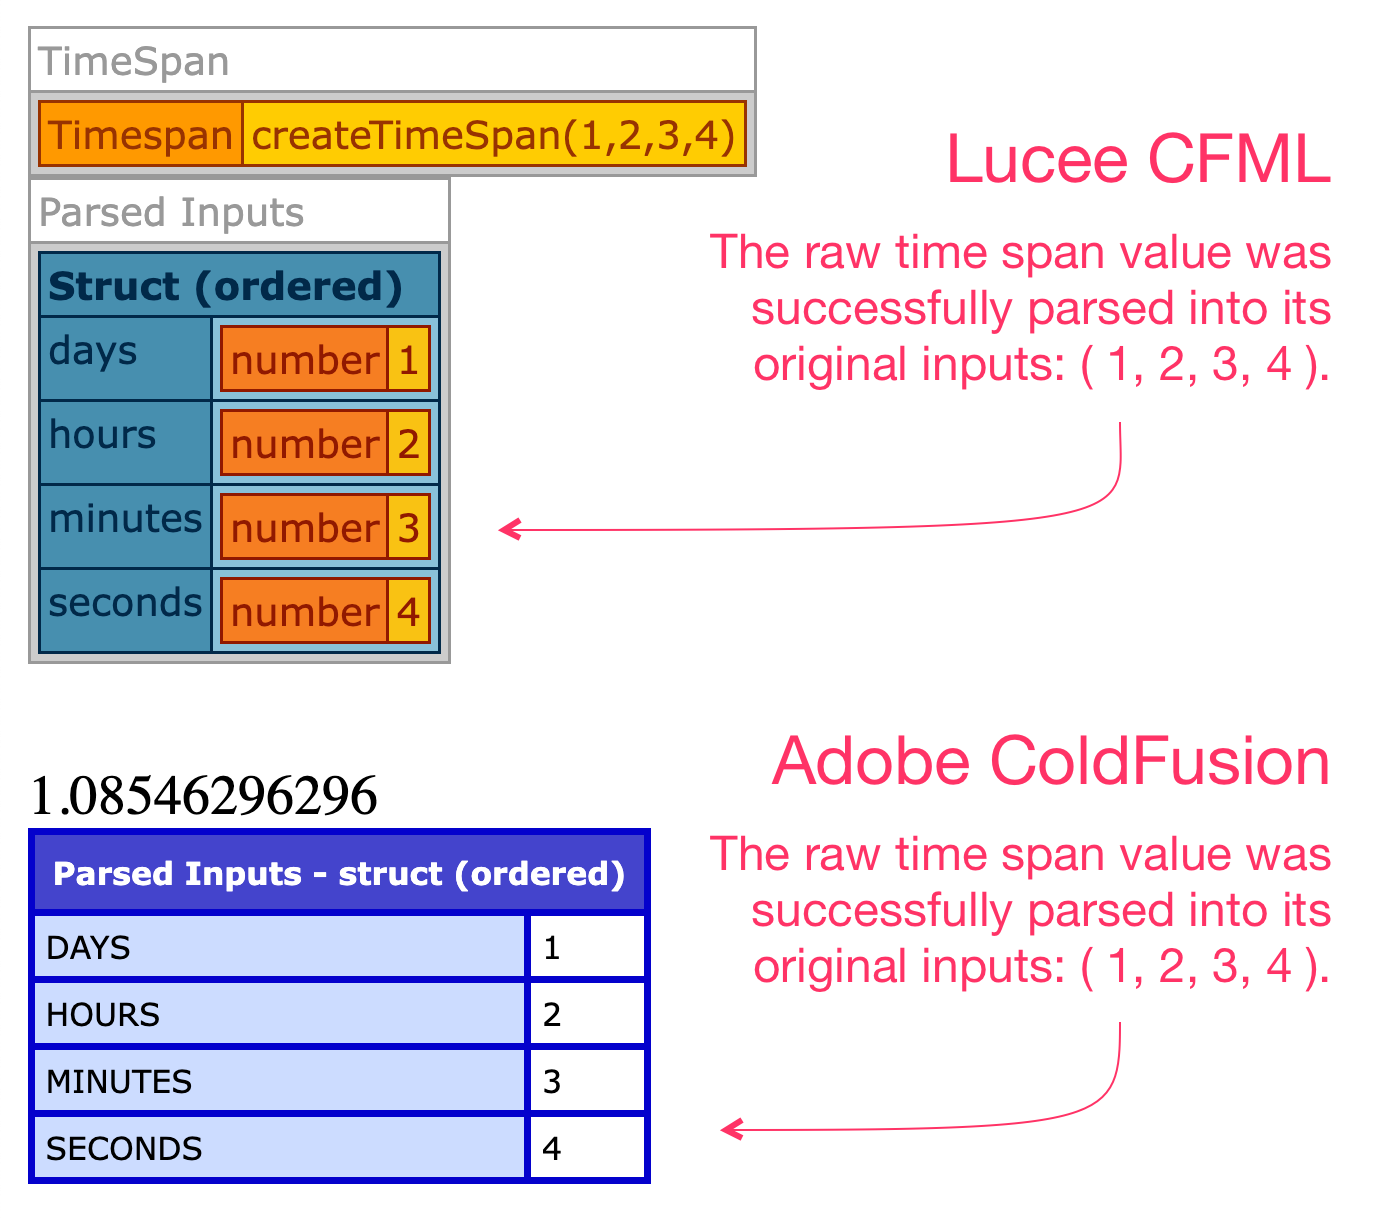 The result of parsing a time span in both Lucee CFML and Adobe ColdFusion.